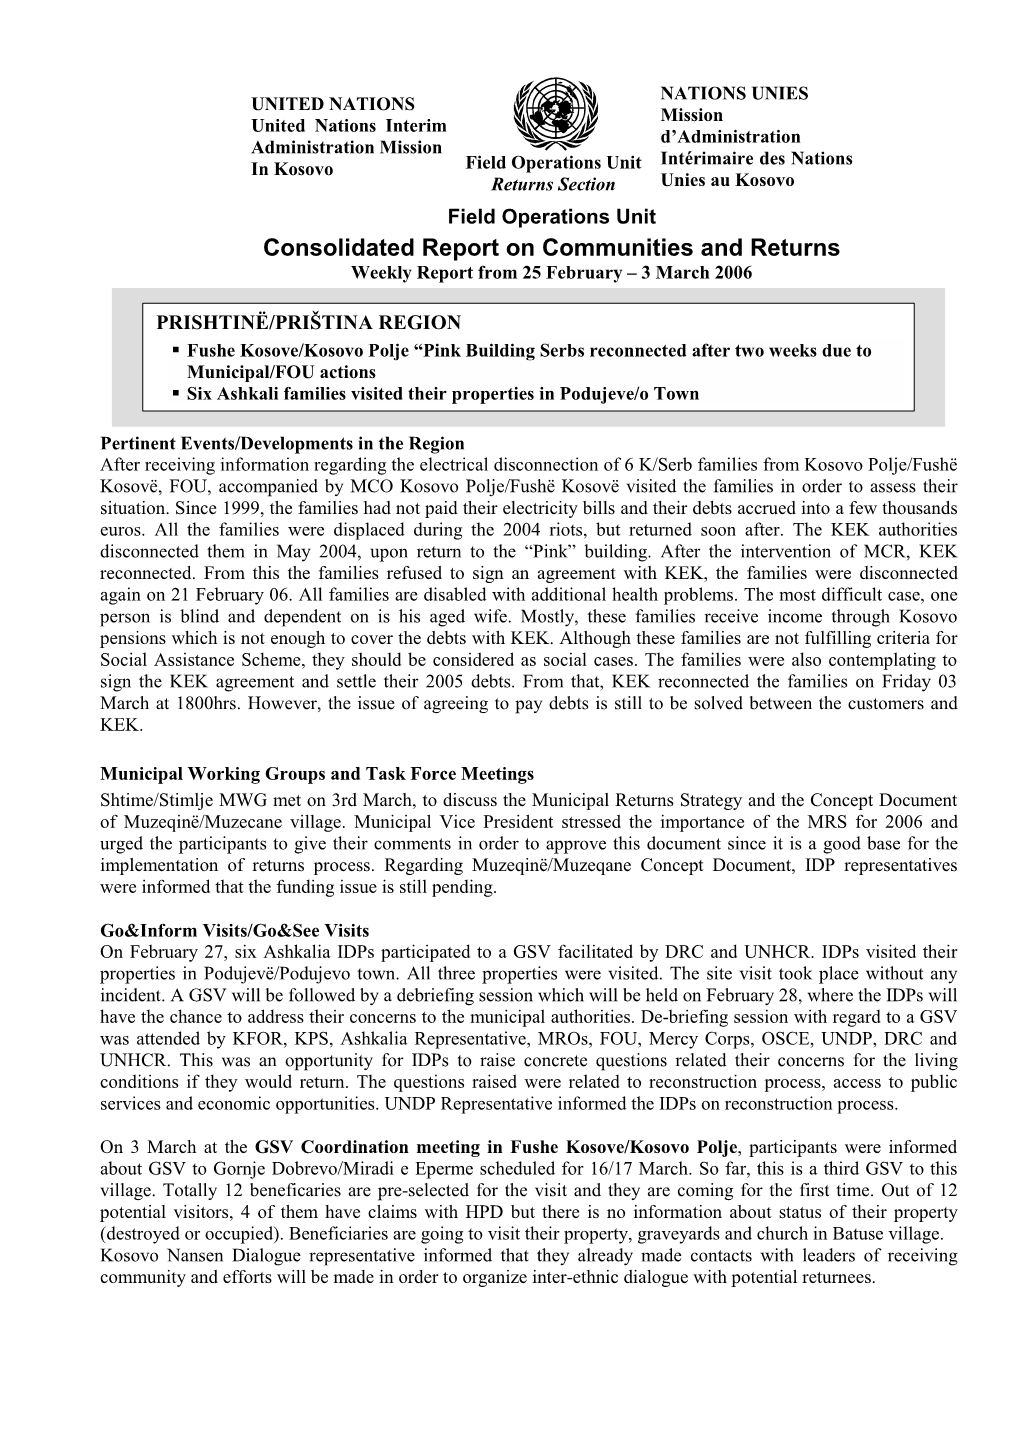 Consolidated Report on Communities and Returns Weekly Report from 25 February – 3 March 2006